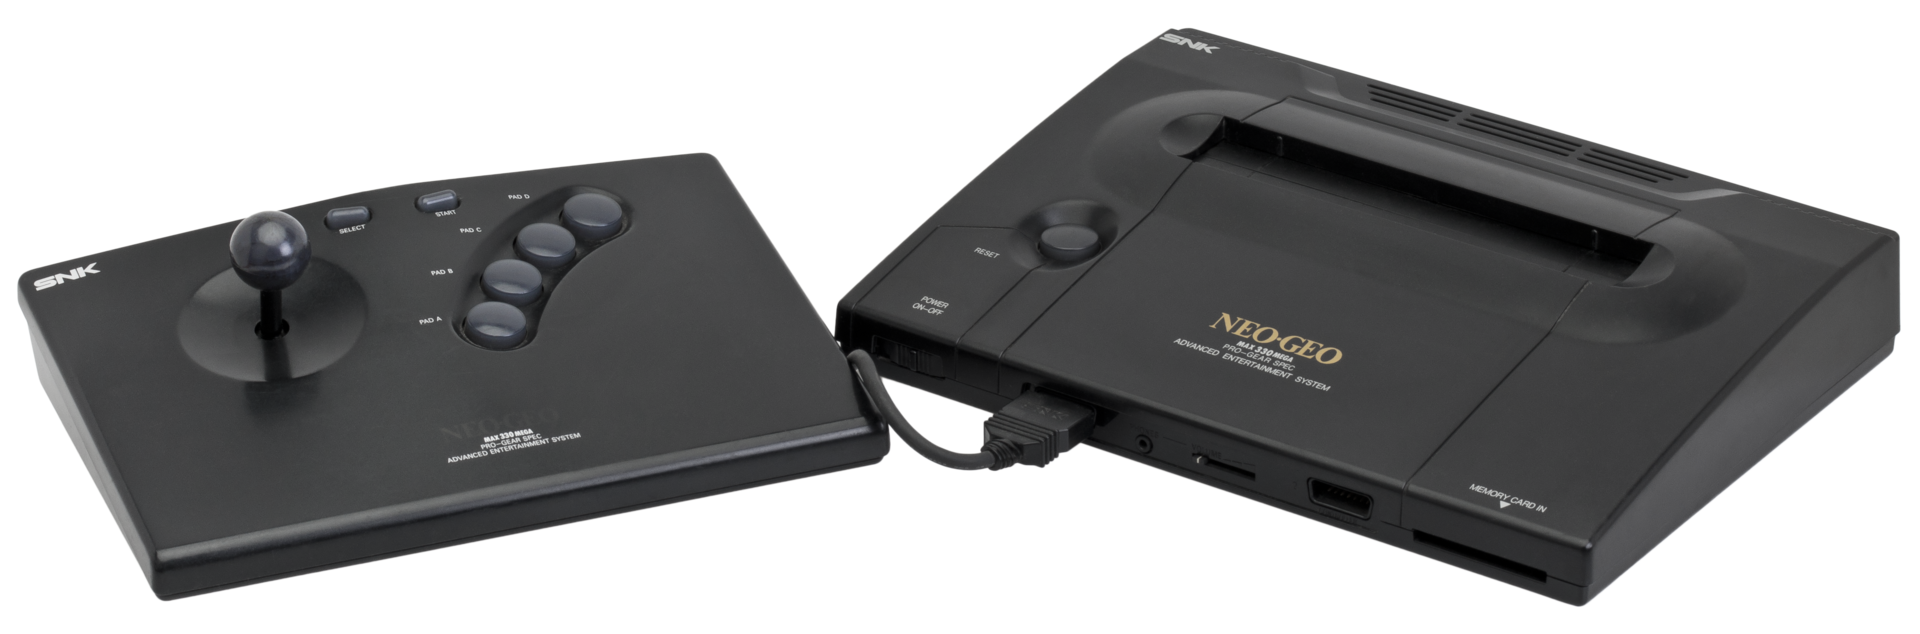 Neo-Geo-AES-Console-Set.png